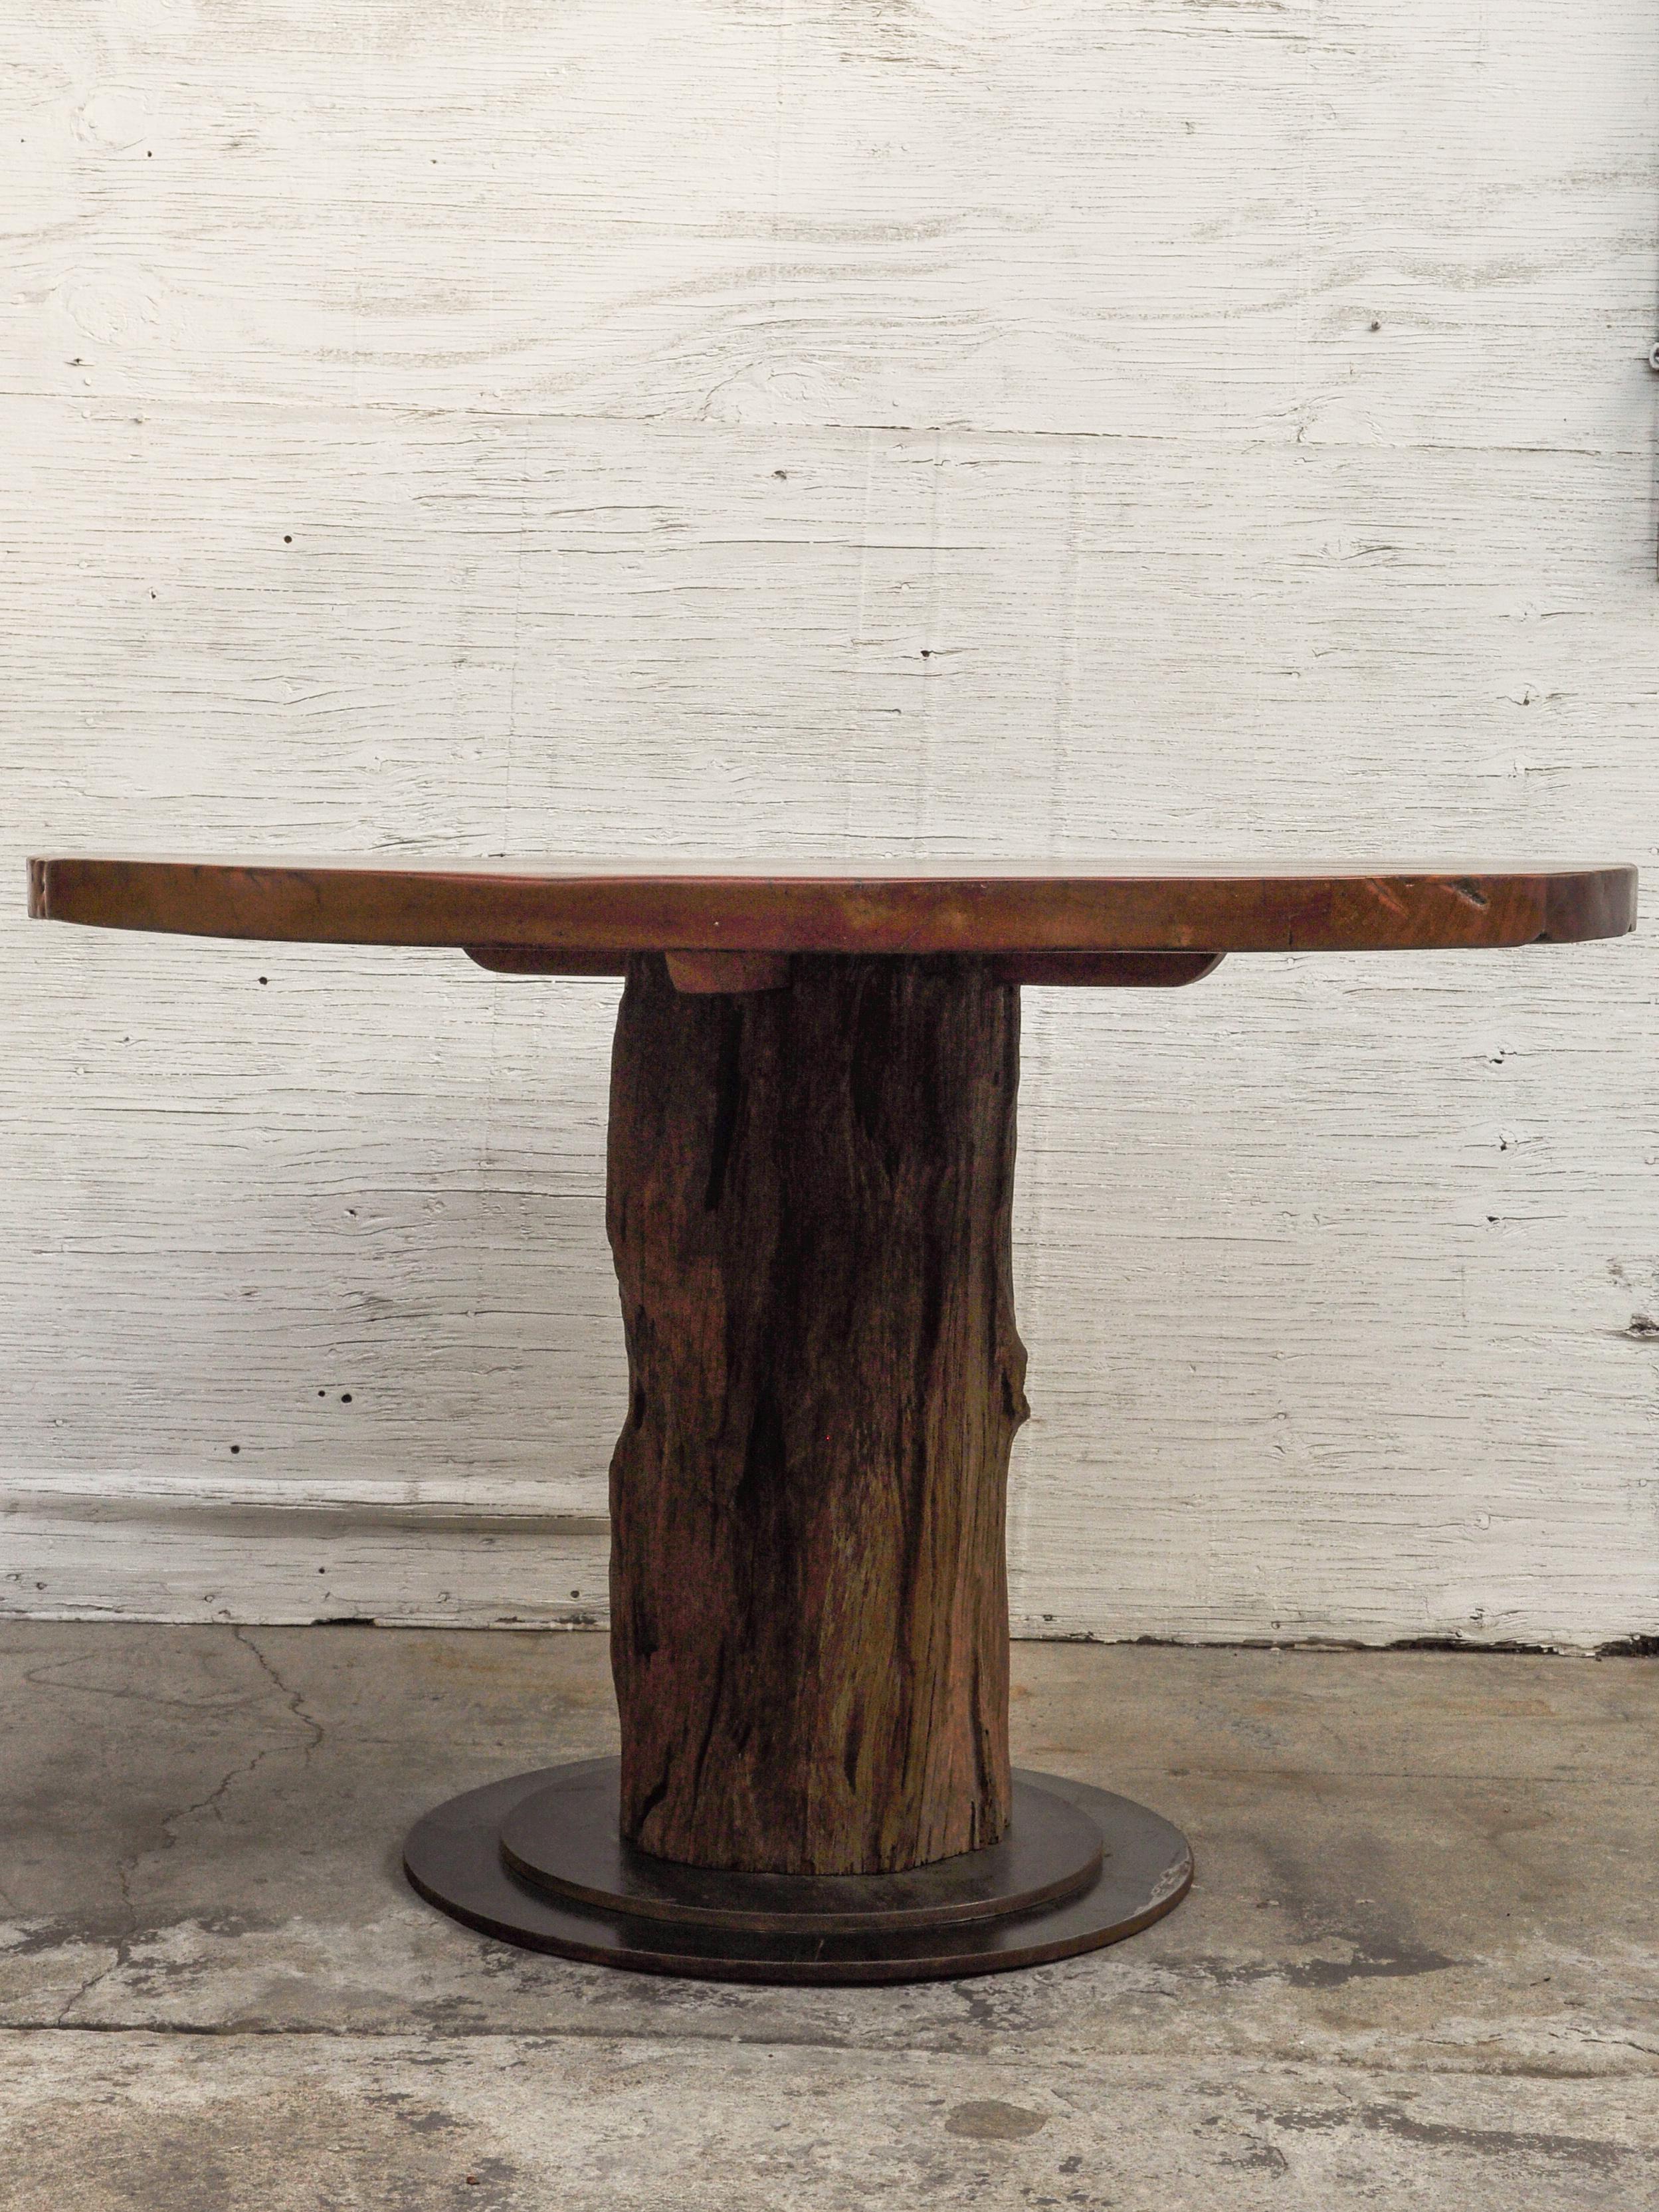 Hand-Crafted Rustic Round Table Recycled Bridge Wood with Tiered Steel Plate Base